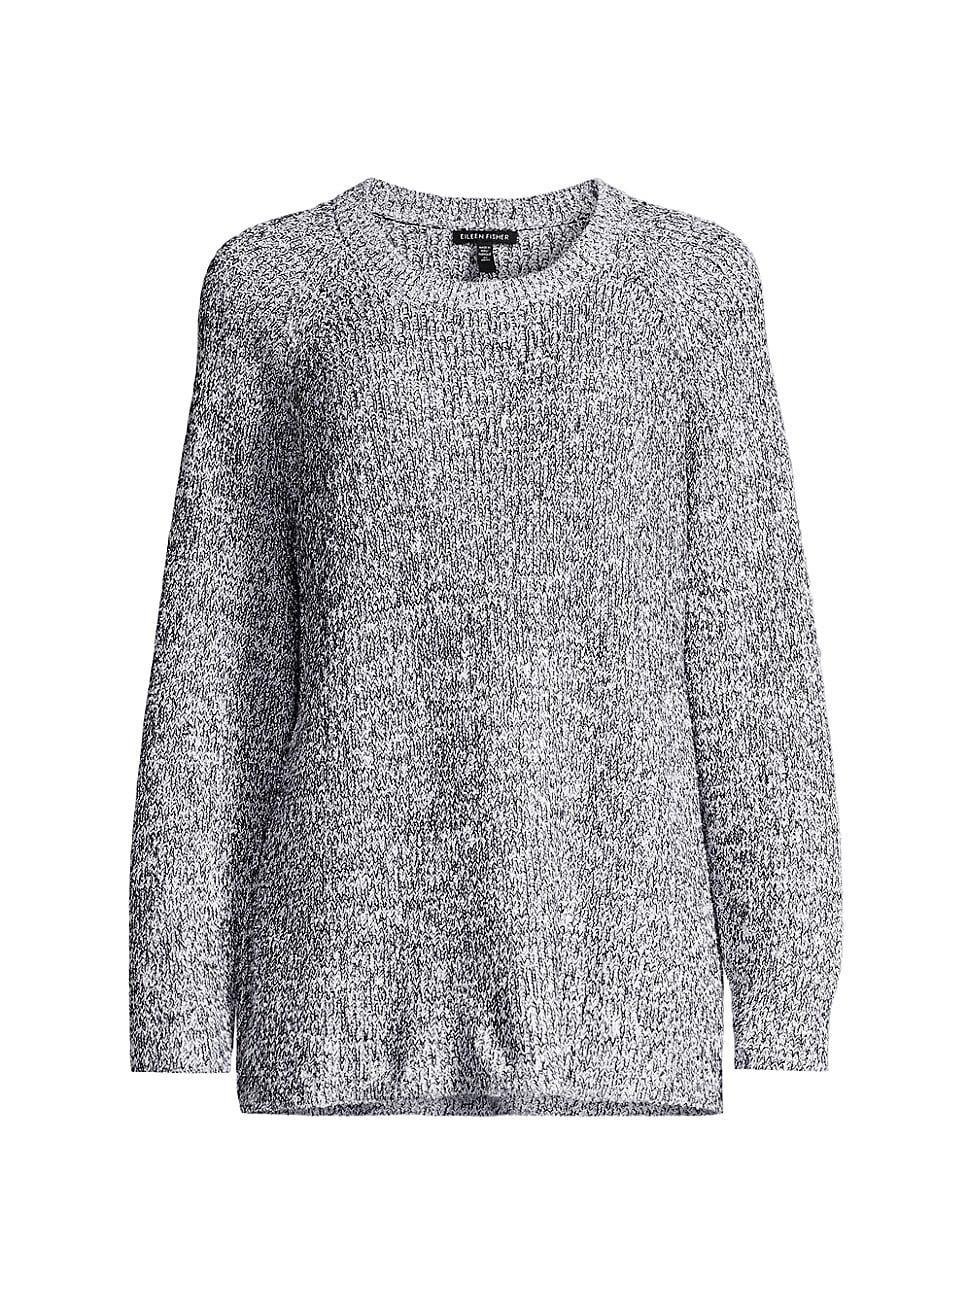 Eileen Fisher Tunic Sweater Product Image